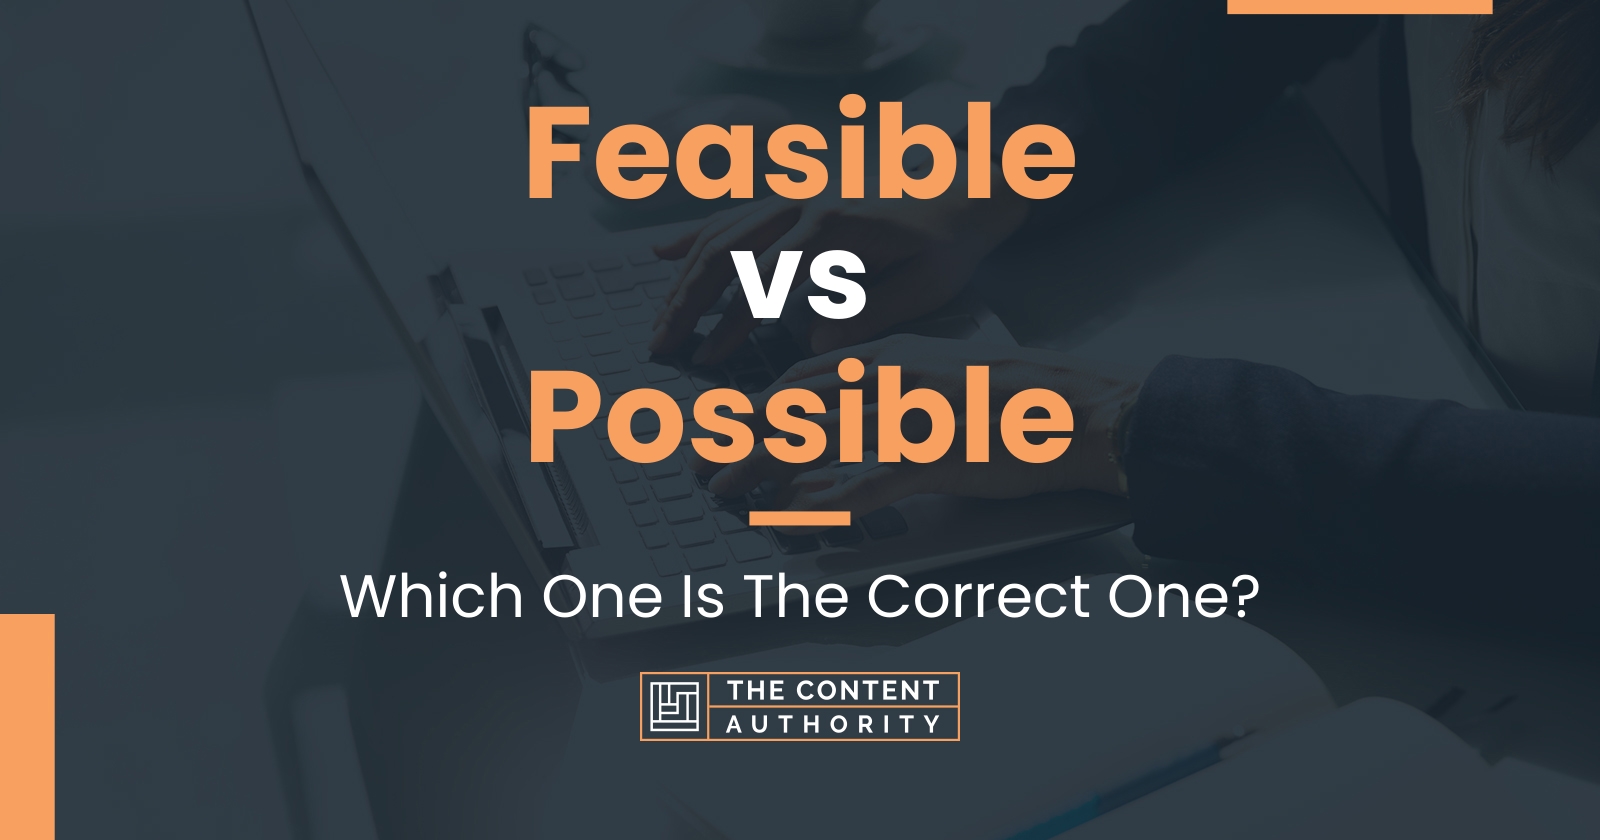 Feasible vs Possible: Which One Is The Correct One?